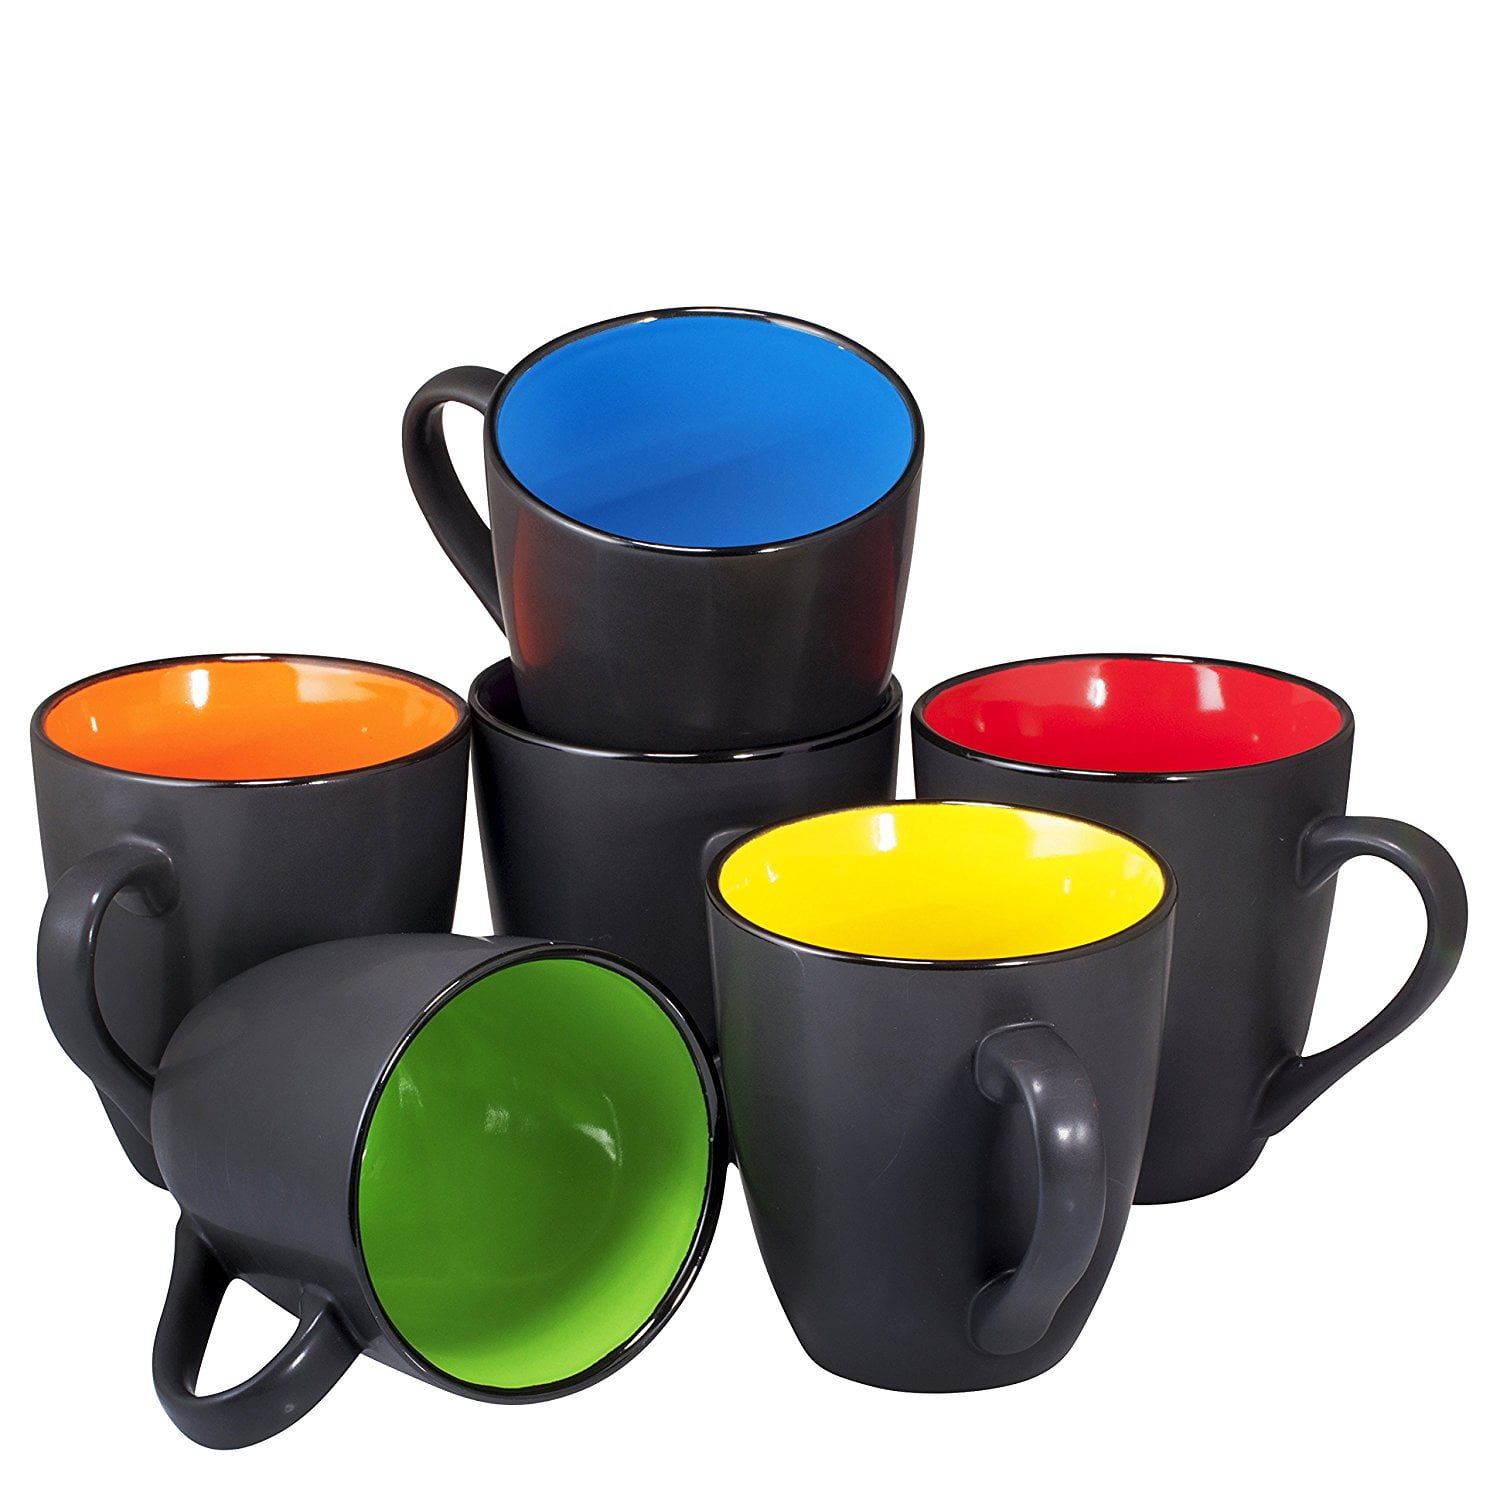 Unique Ceramic Drinking Mugs for Coffee Cool and Unusual Novelty Mug Gift Set Cocoa Tea Made By Humans Square Round Mugs Set of 4 Assorted Colors 16 oz